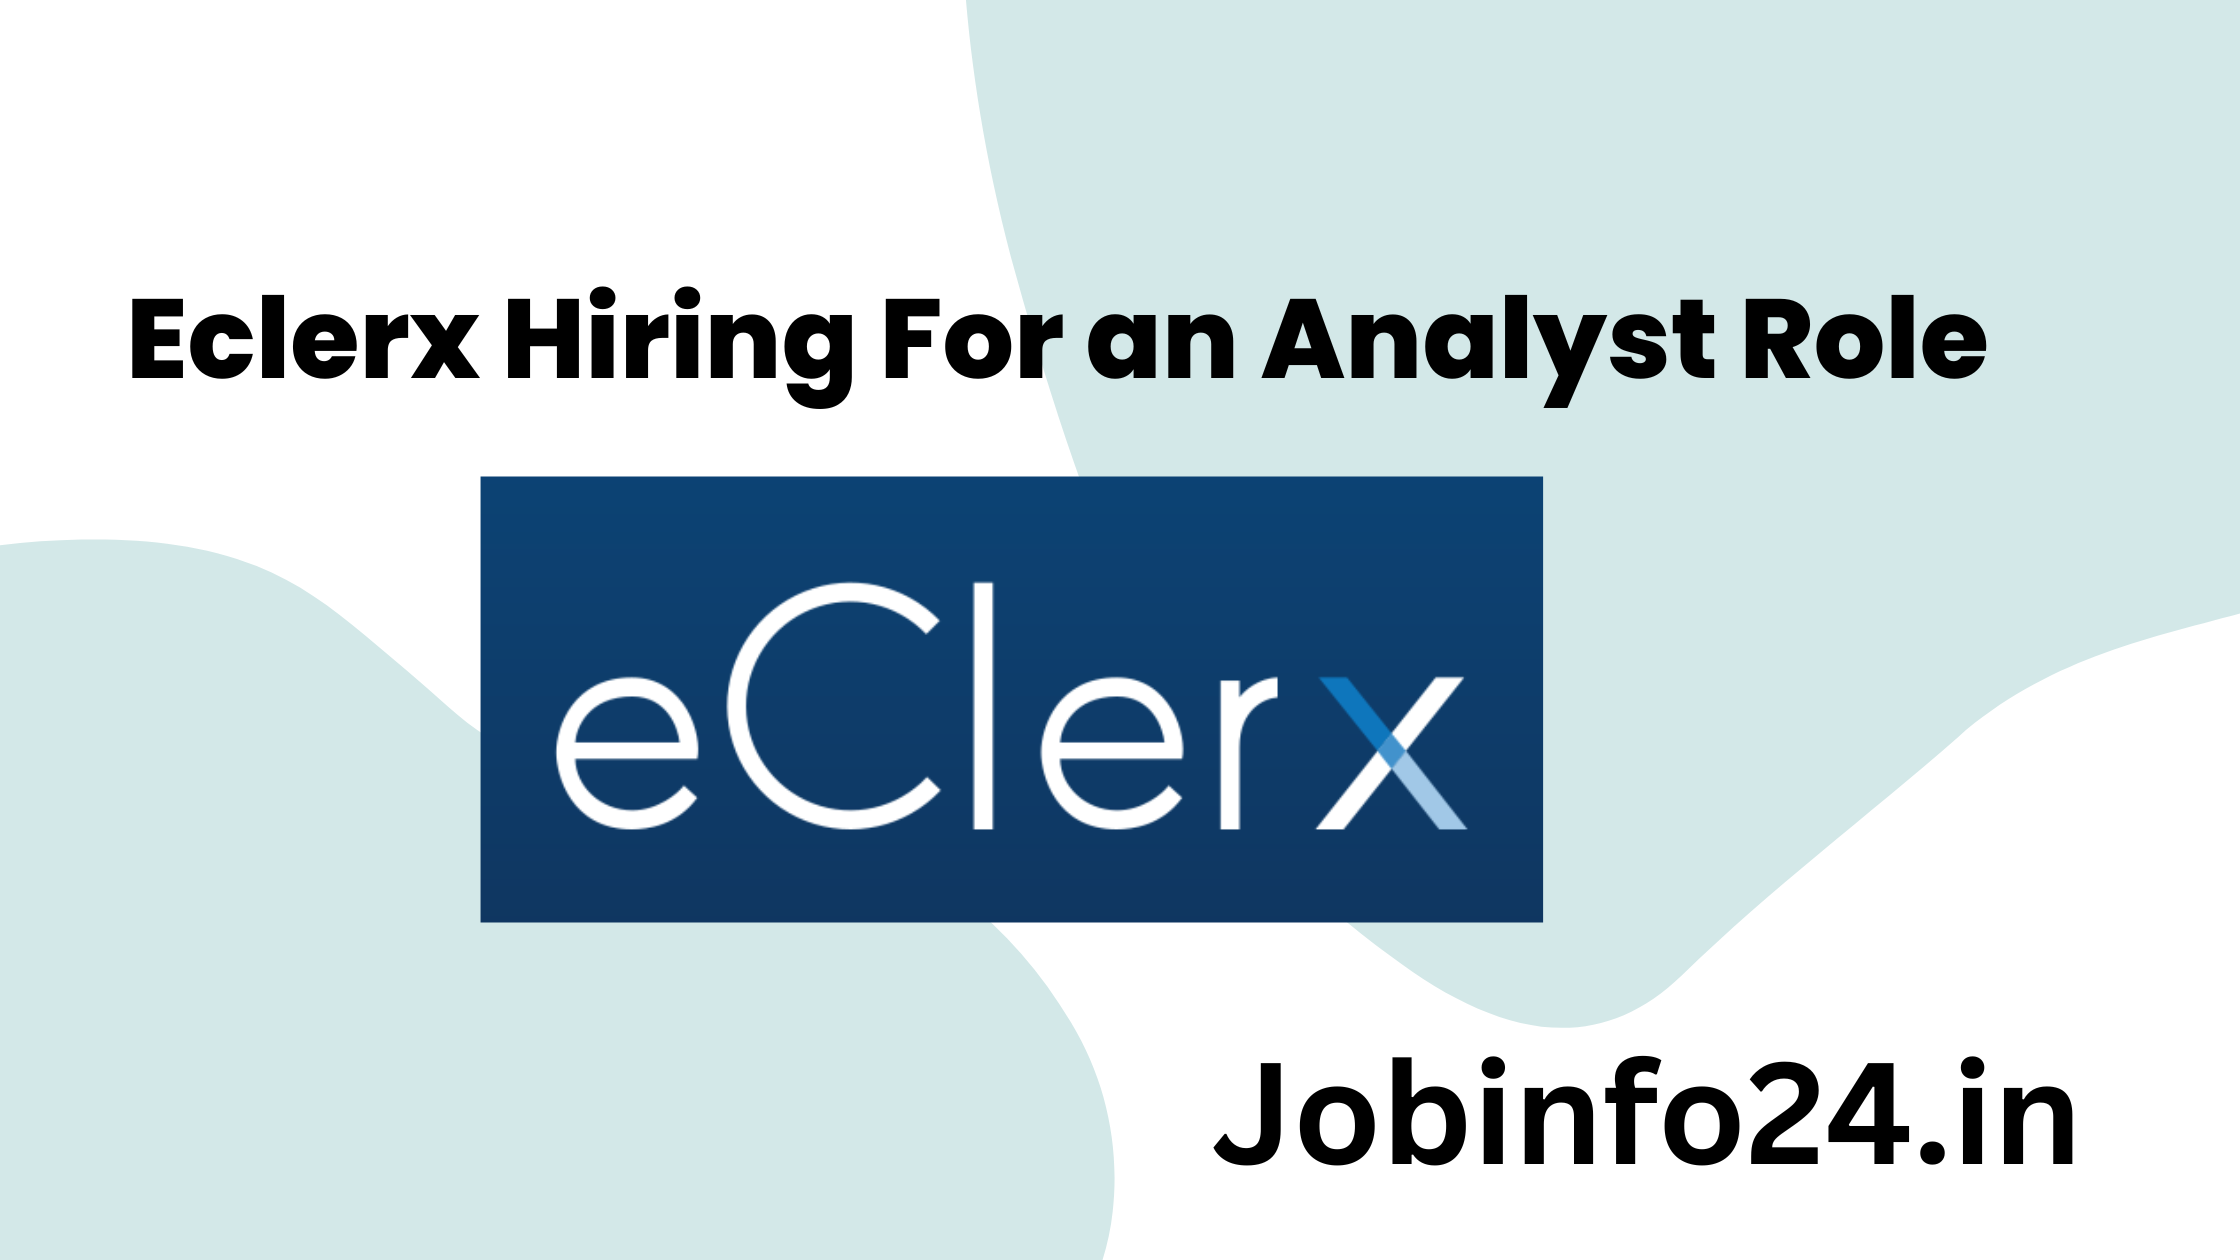 Eclerx Hiring For an Analyst Role